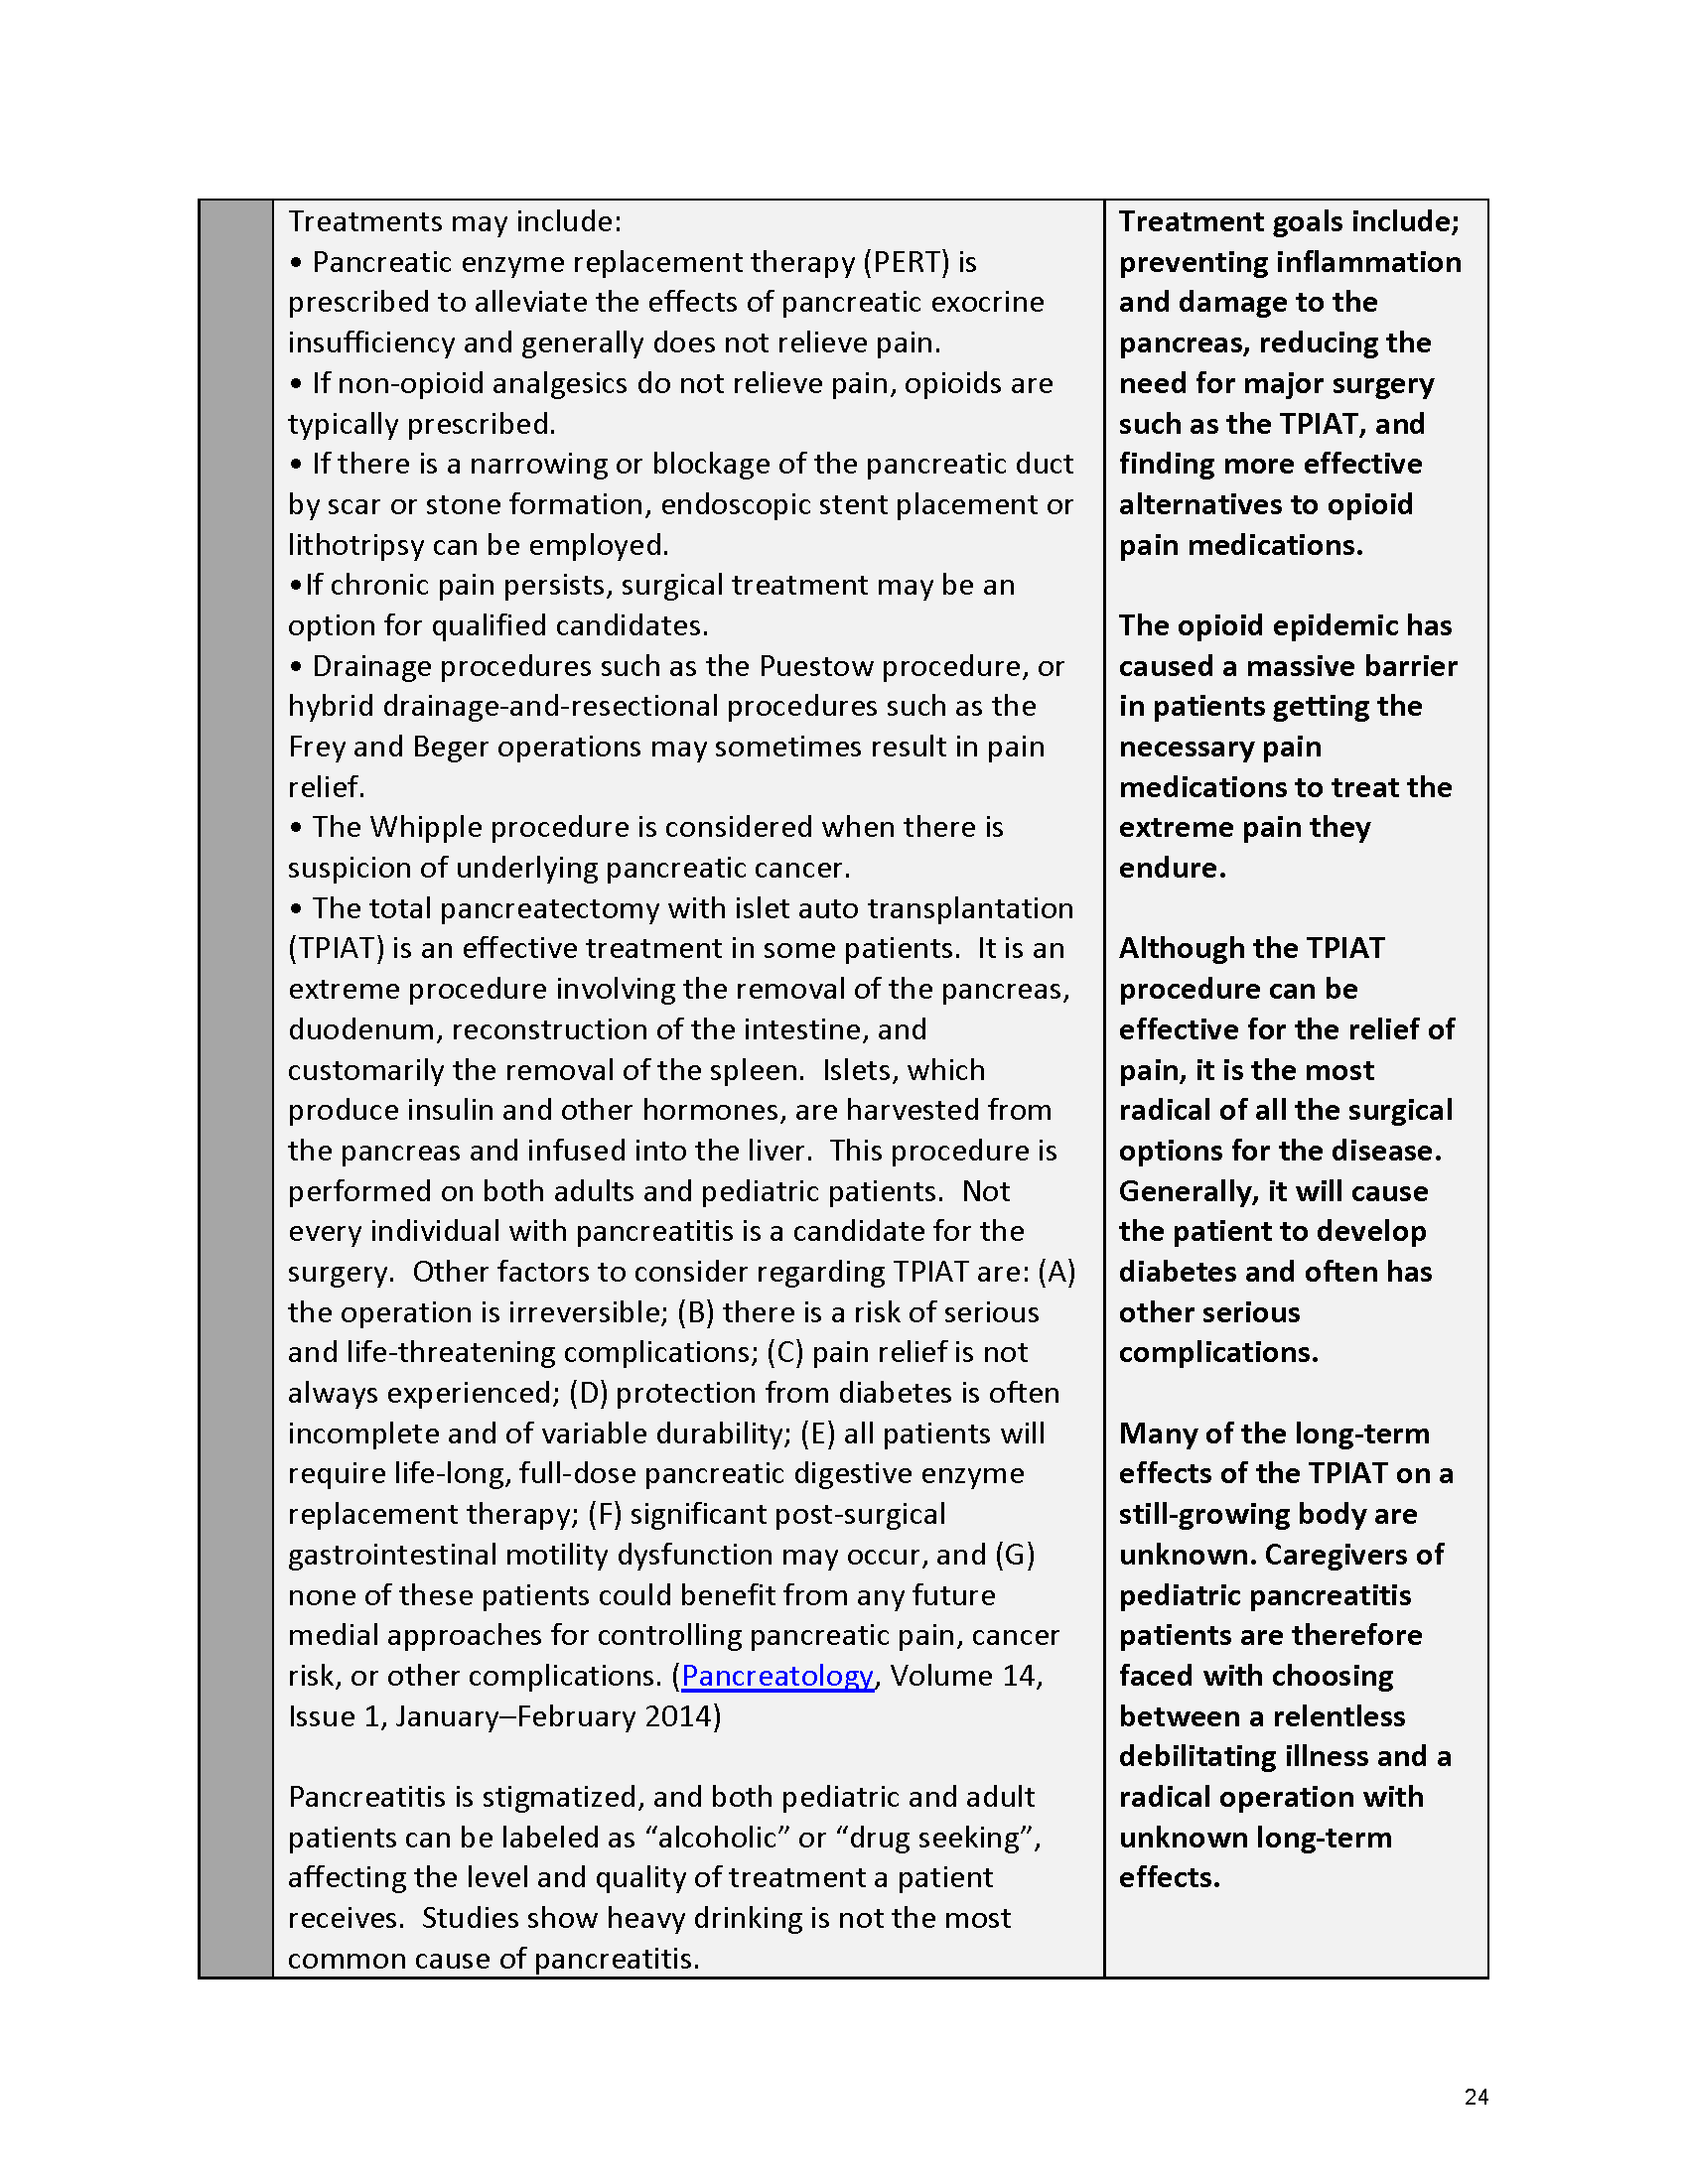 National Pancreas Foundation Voice of the Patient Report_Page_26